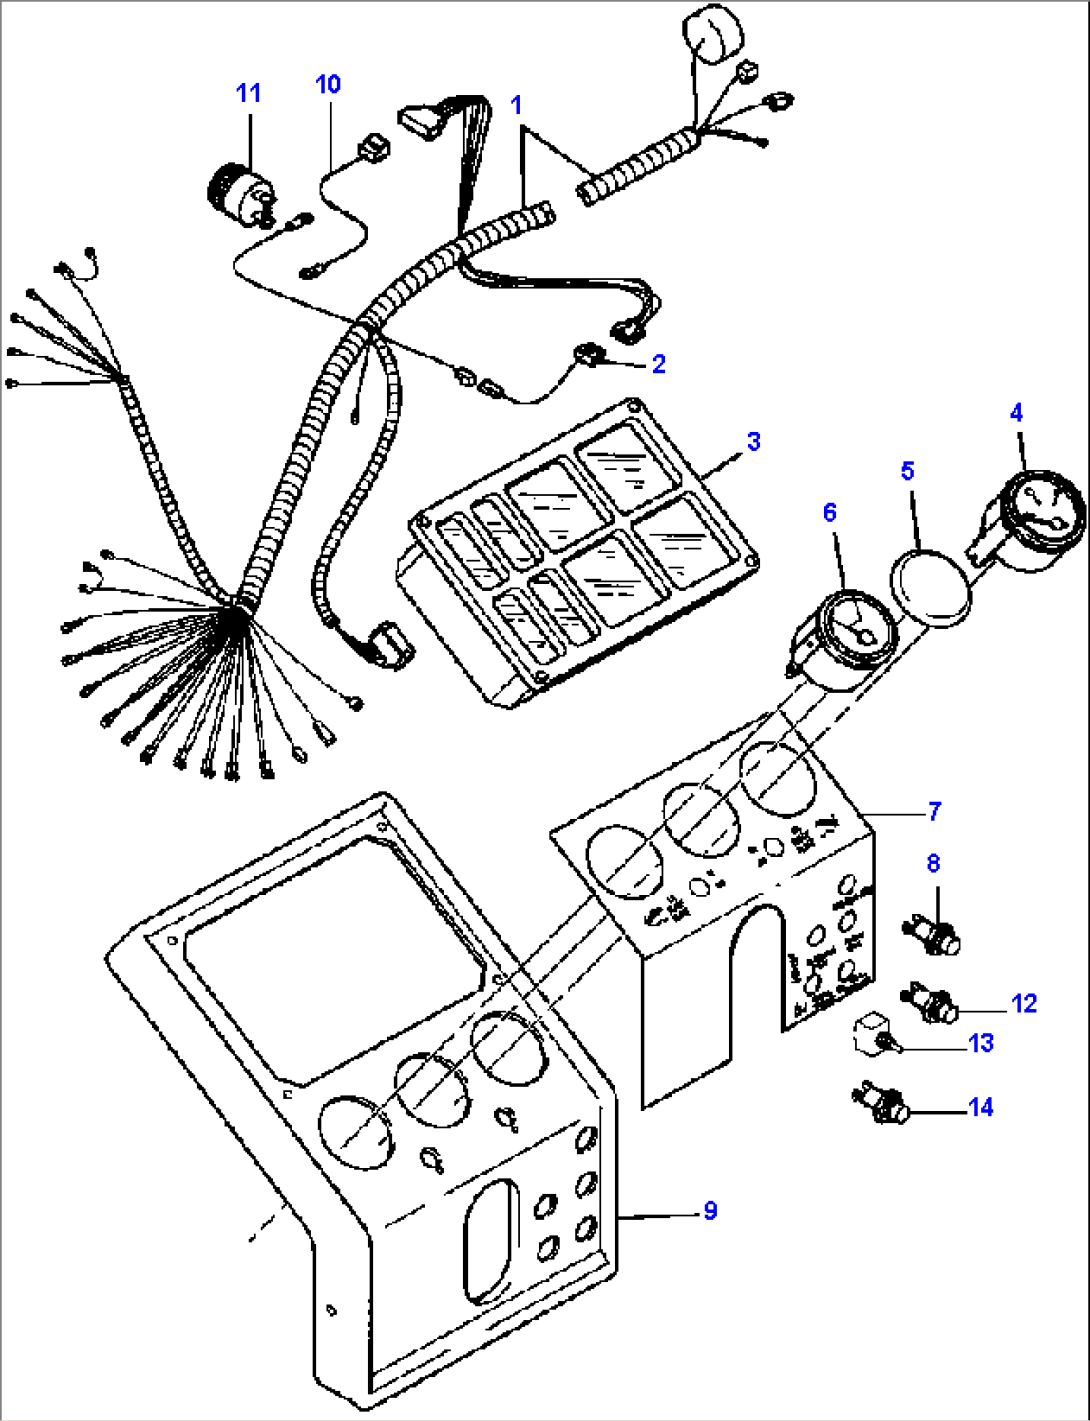 FIG. E5260-01A1 STEERING CONSOLE INSTRUMENT PANEL